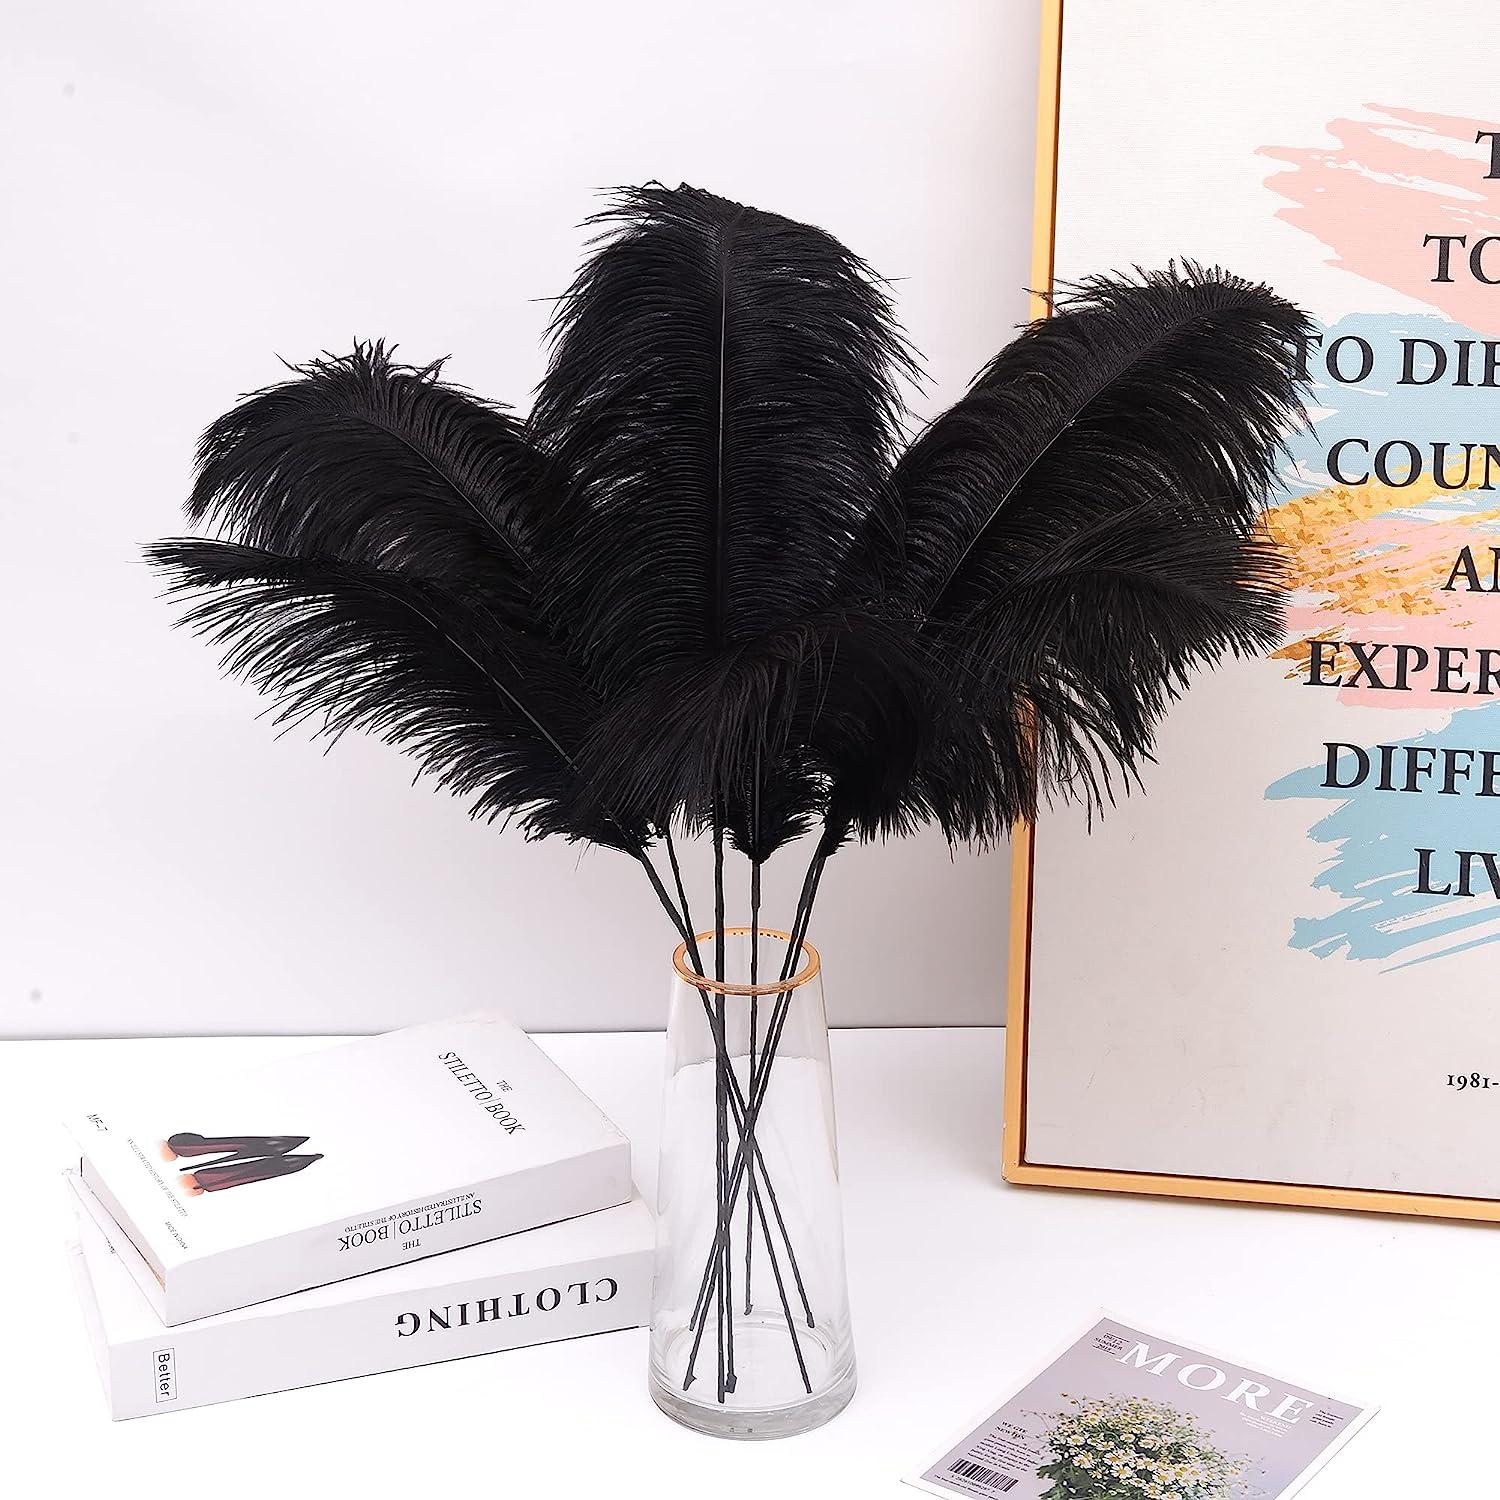  DGYJJZ 20pcs Black Ostrich Feathers Bulk - Making Kit 20-22  Inch Natural Ostrich Feathers for Vase, Wedding Party Centerpieces, Floral  Arrangement and Home Decoration : Arts, Crafts & Sewing